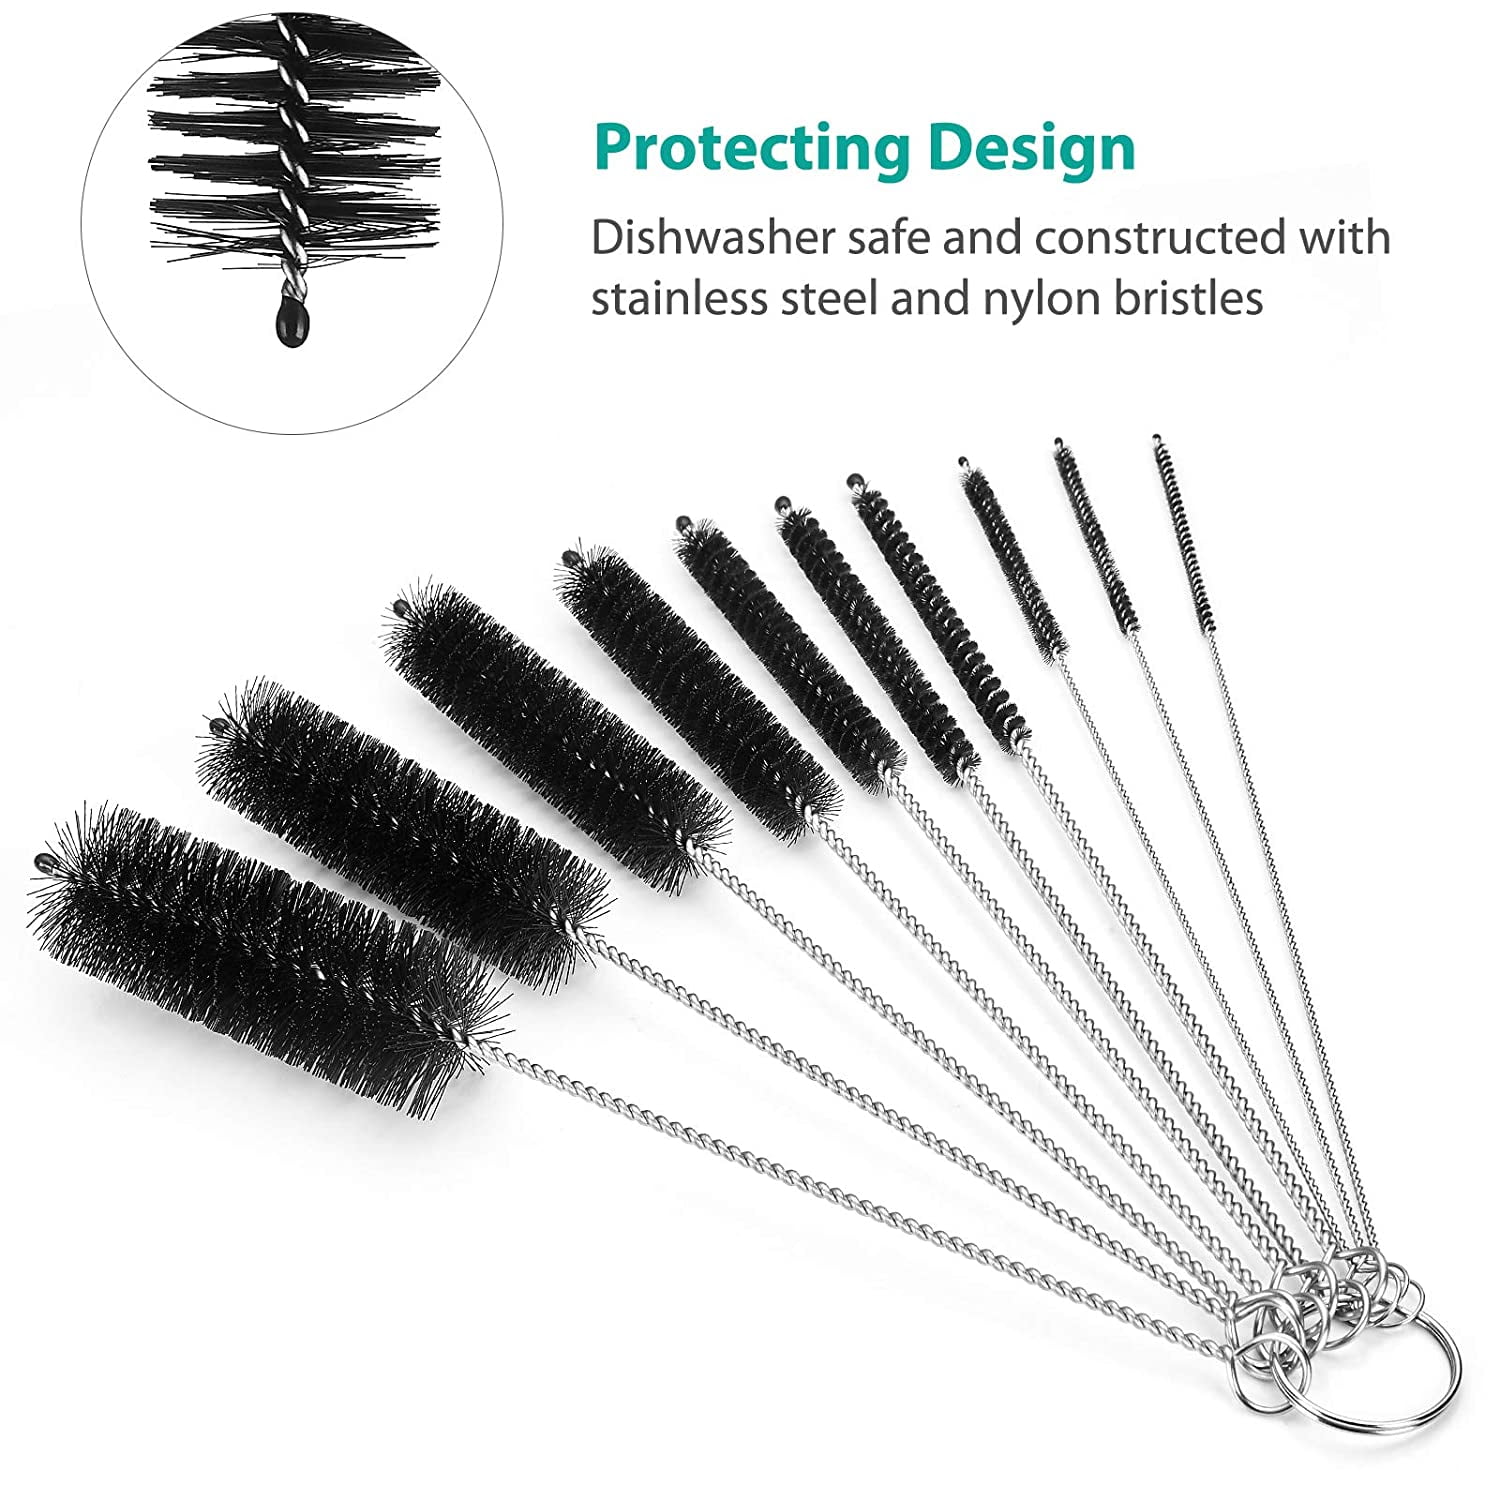 Loveinusa 8 inch Nylon Tube Pipe Brushes Cleaning Brush Set,with Protective Cap for Drinking Straws, Glasses, Keyboards, Jewelry